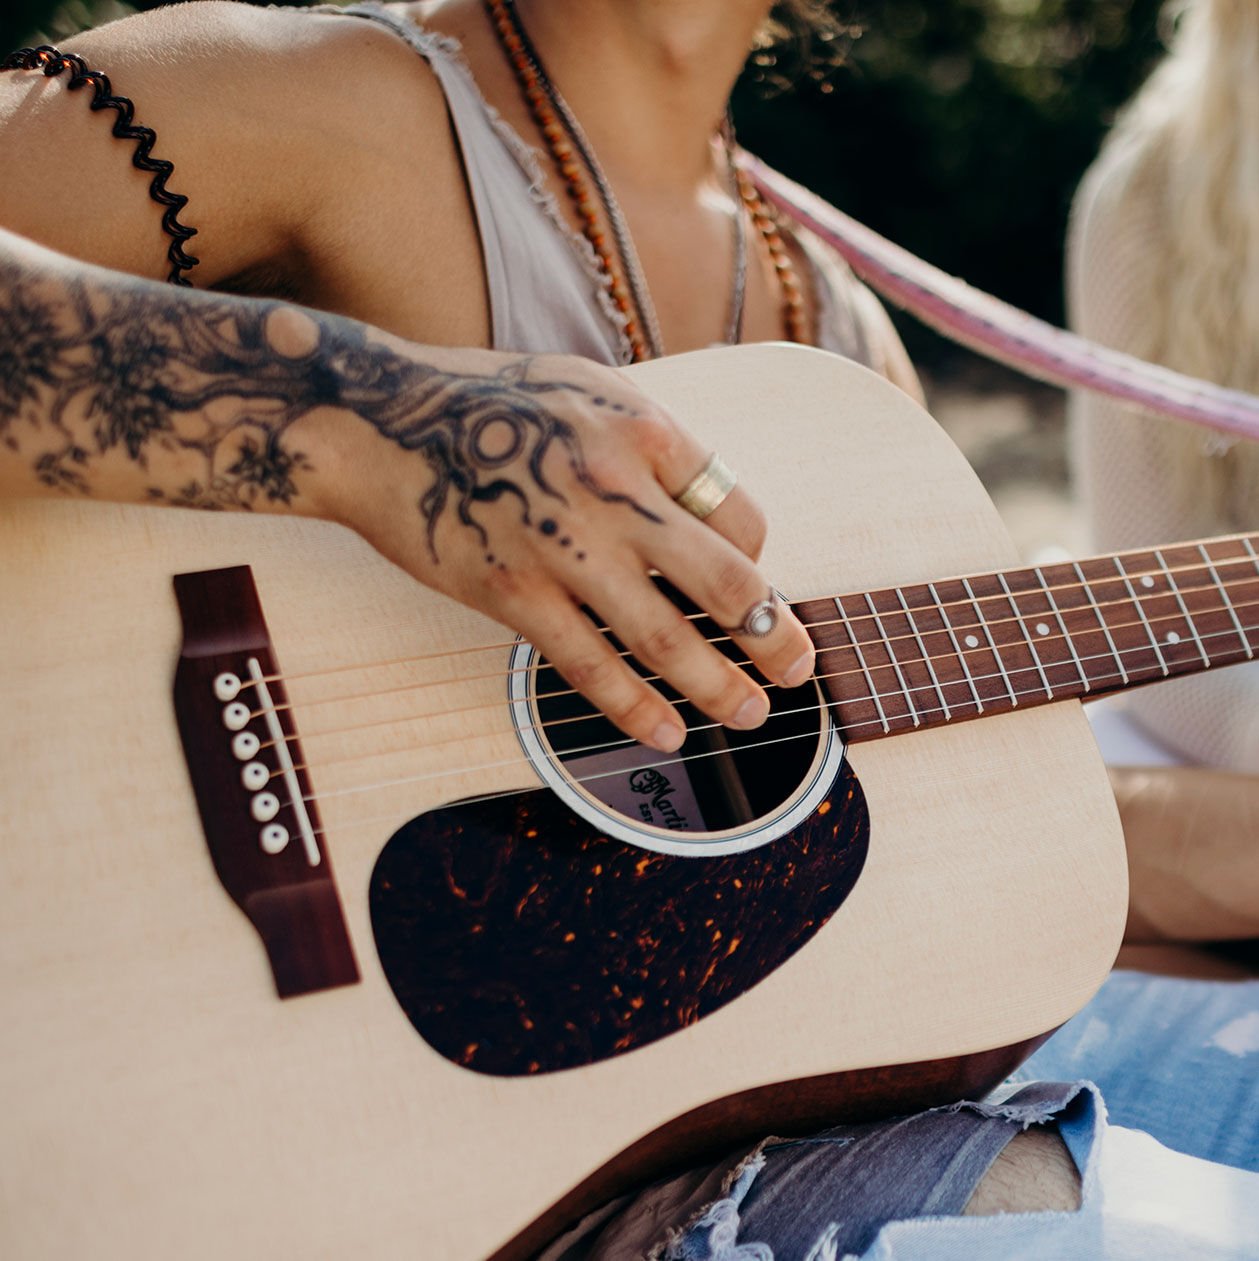 Person with tattoos playing an acoustic guitar